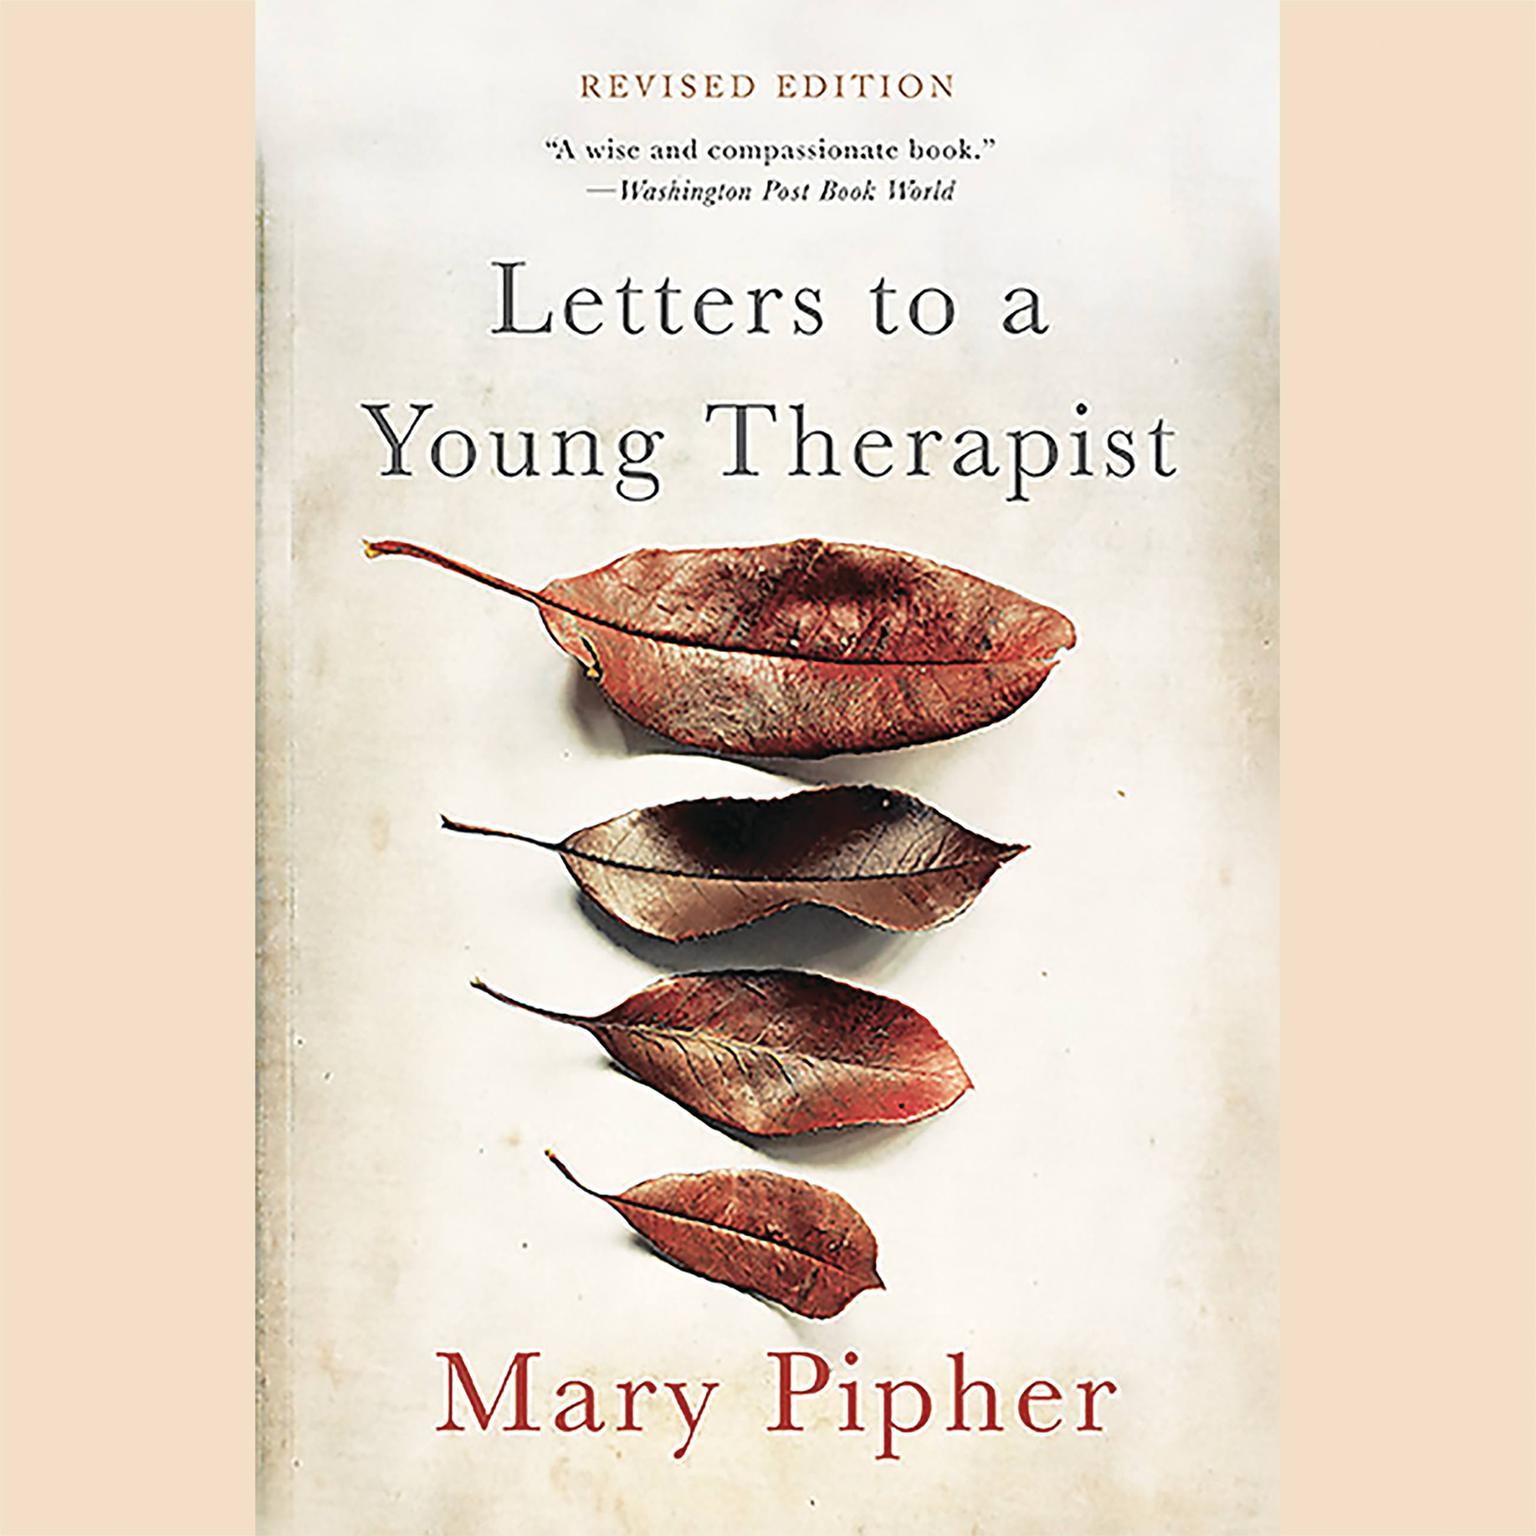 Letters to a Young Therapist Audiobook, by Mary Pipher